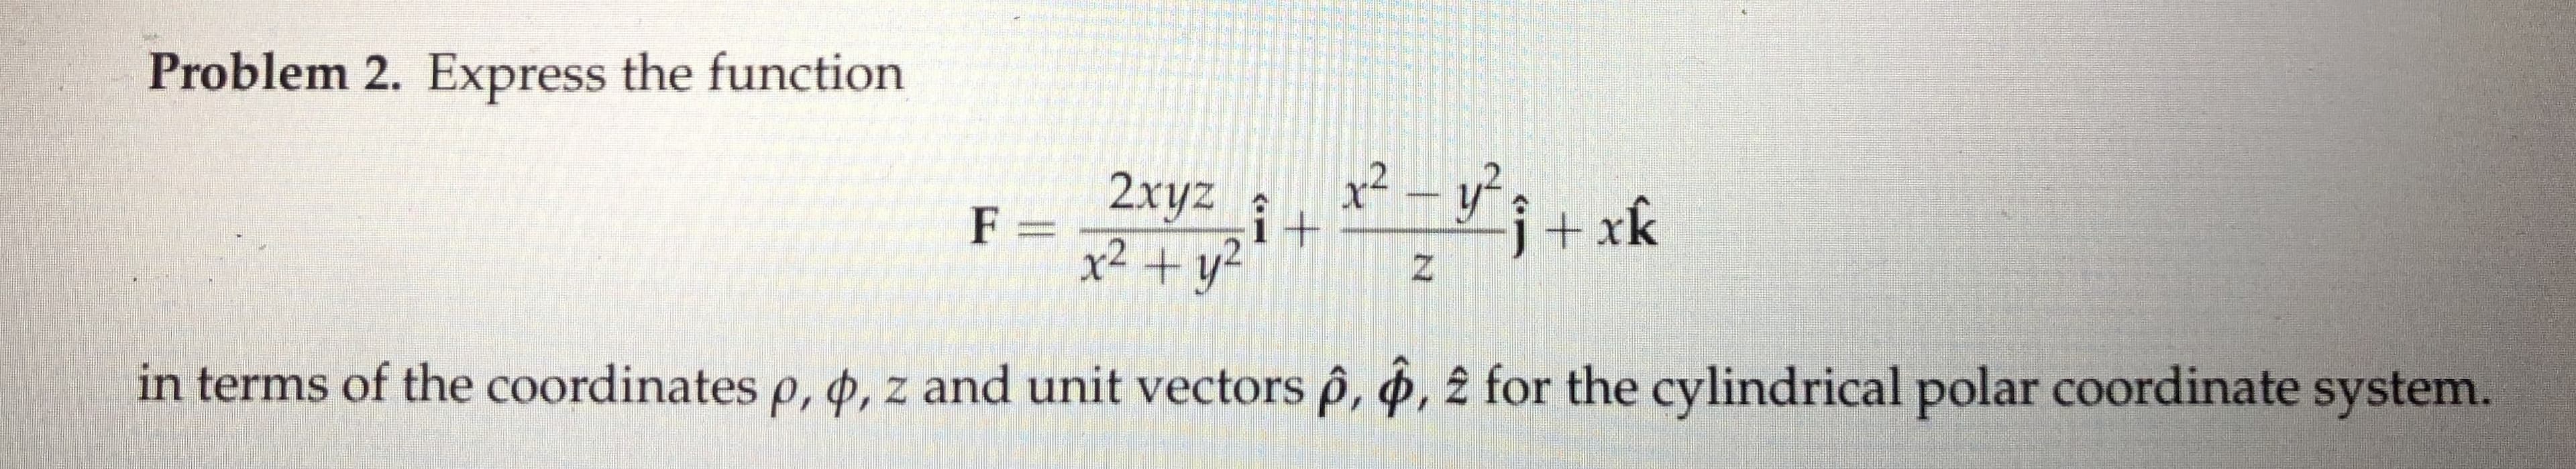 Problem 2. Express the function
x² – y? 3
2xyz
it
x² + y²
j+xk
F =
in terms of the coordinates p, 4, z and unit vectors êp, §, ê for the cylindrical polar coordinate system.
